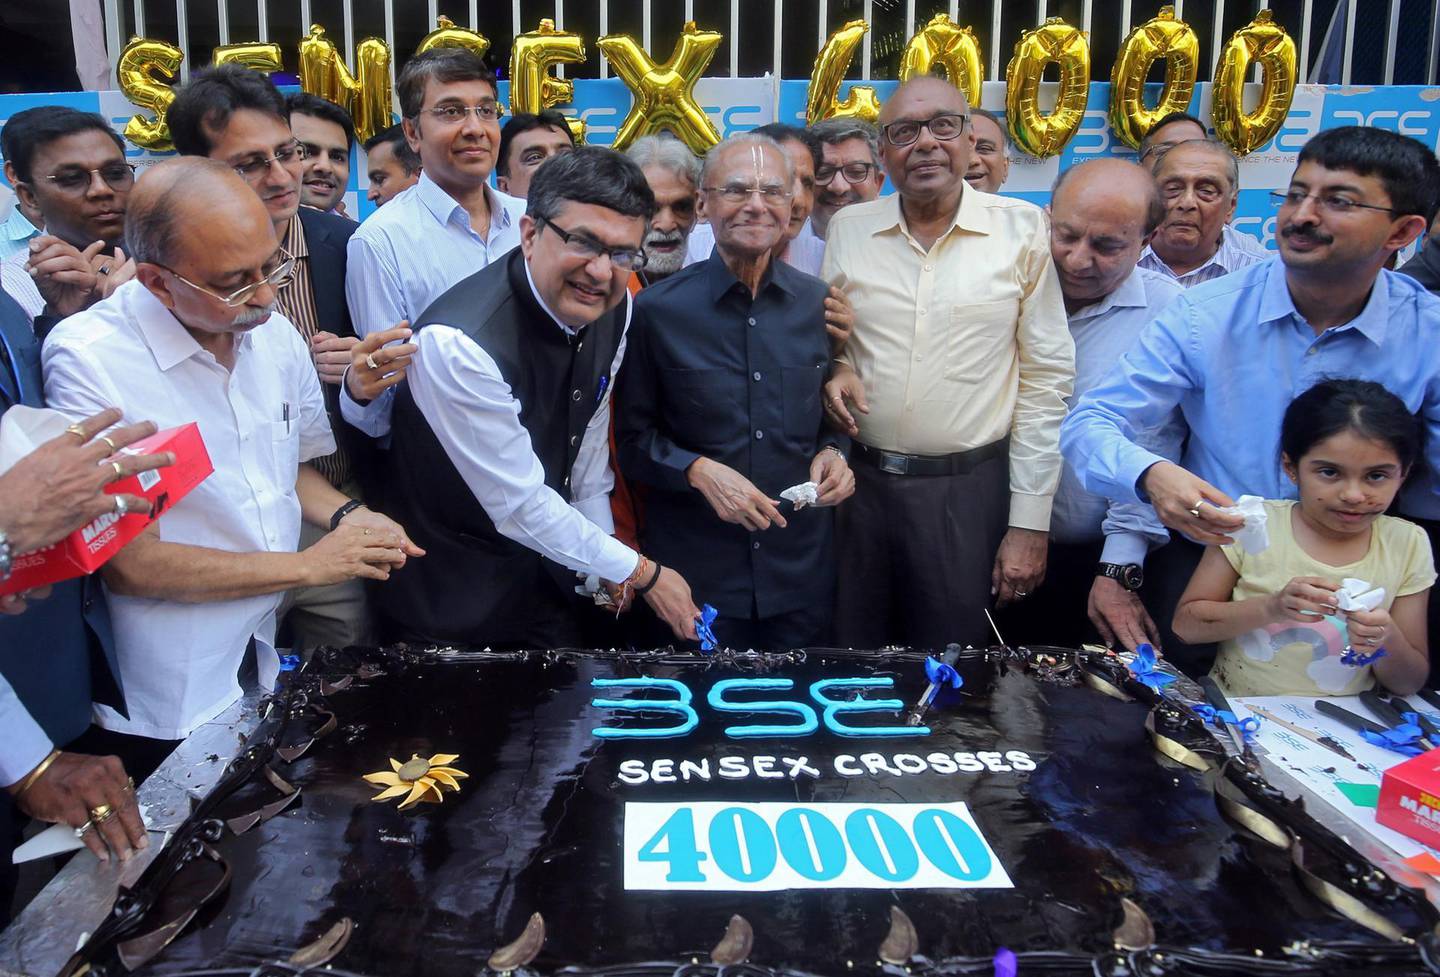 Ashishkumar Chauhan, MD and CEO of the Bombay Stock Exchange (BSE), poses as he cuts a cake to celebrate the Sensex index rising to over 40,000, in Mumbai, India, May 23, 2019. REUTERS/ Francis Mascarenhas